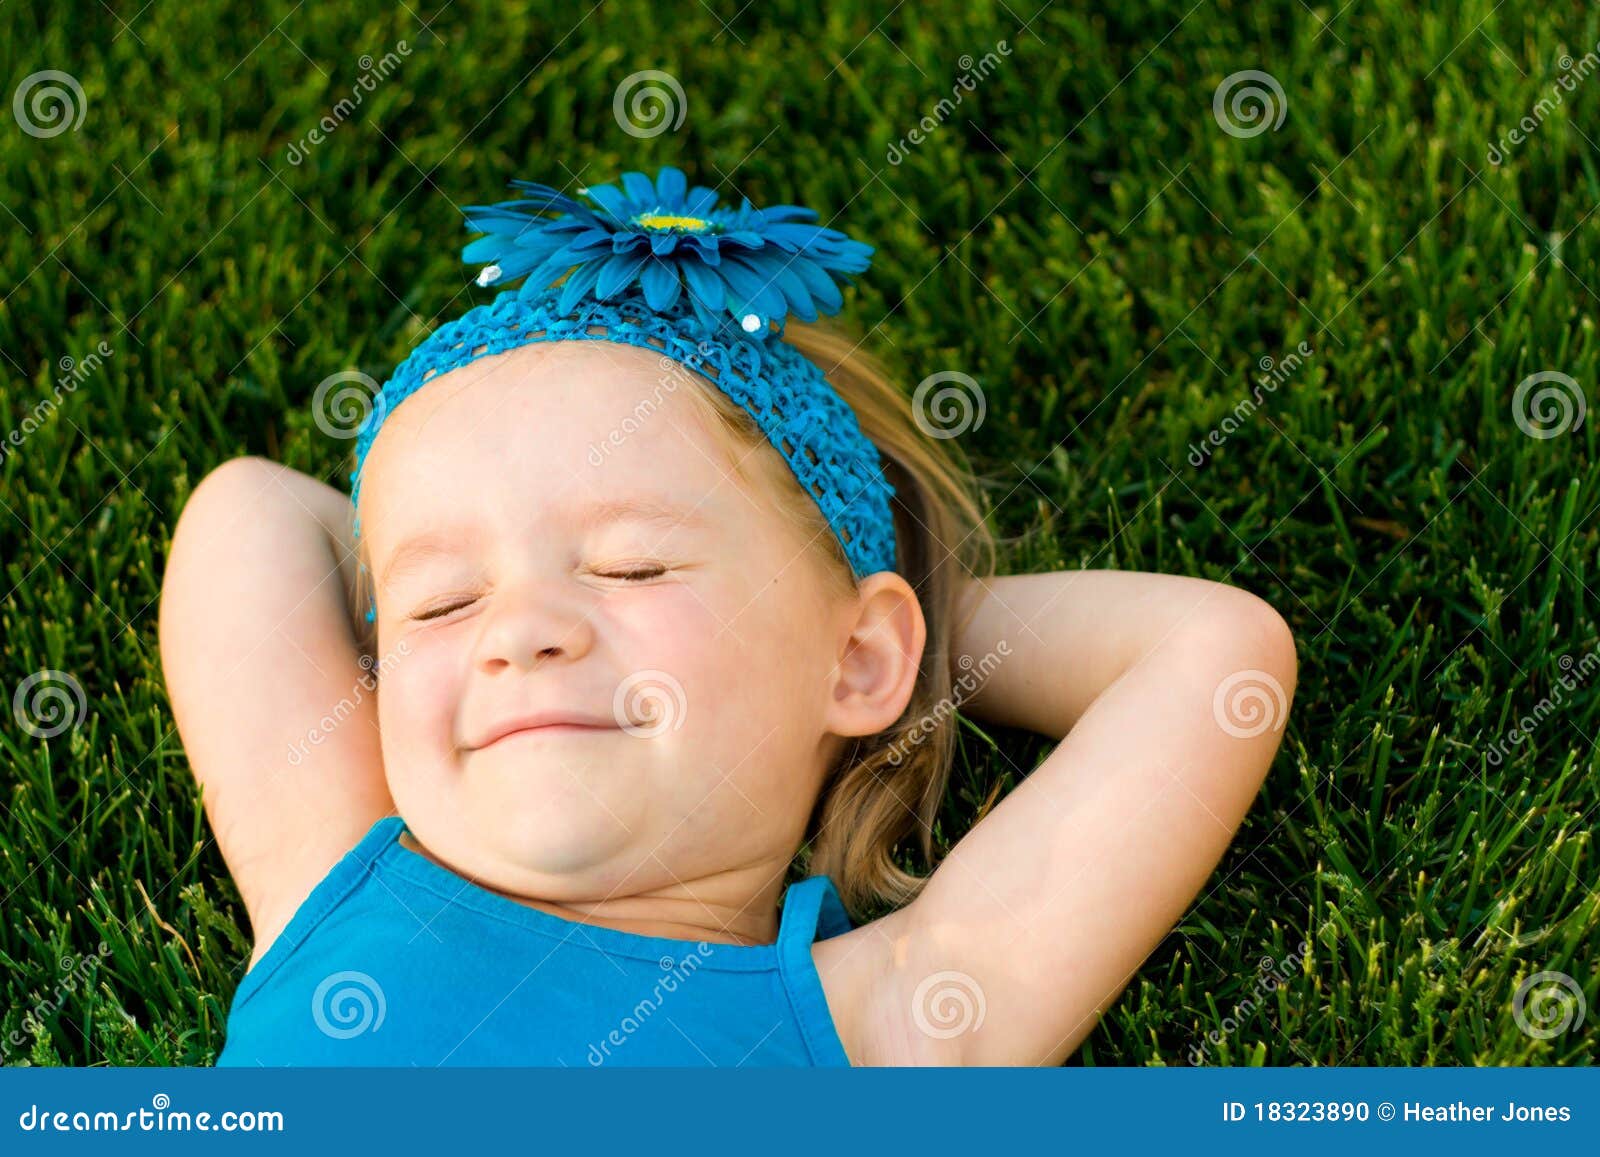 Relaxing Summer Day Stock Photo - Image: 18323890